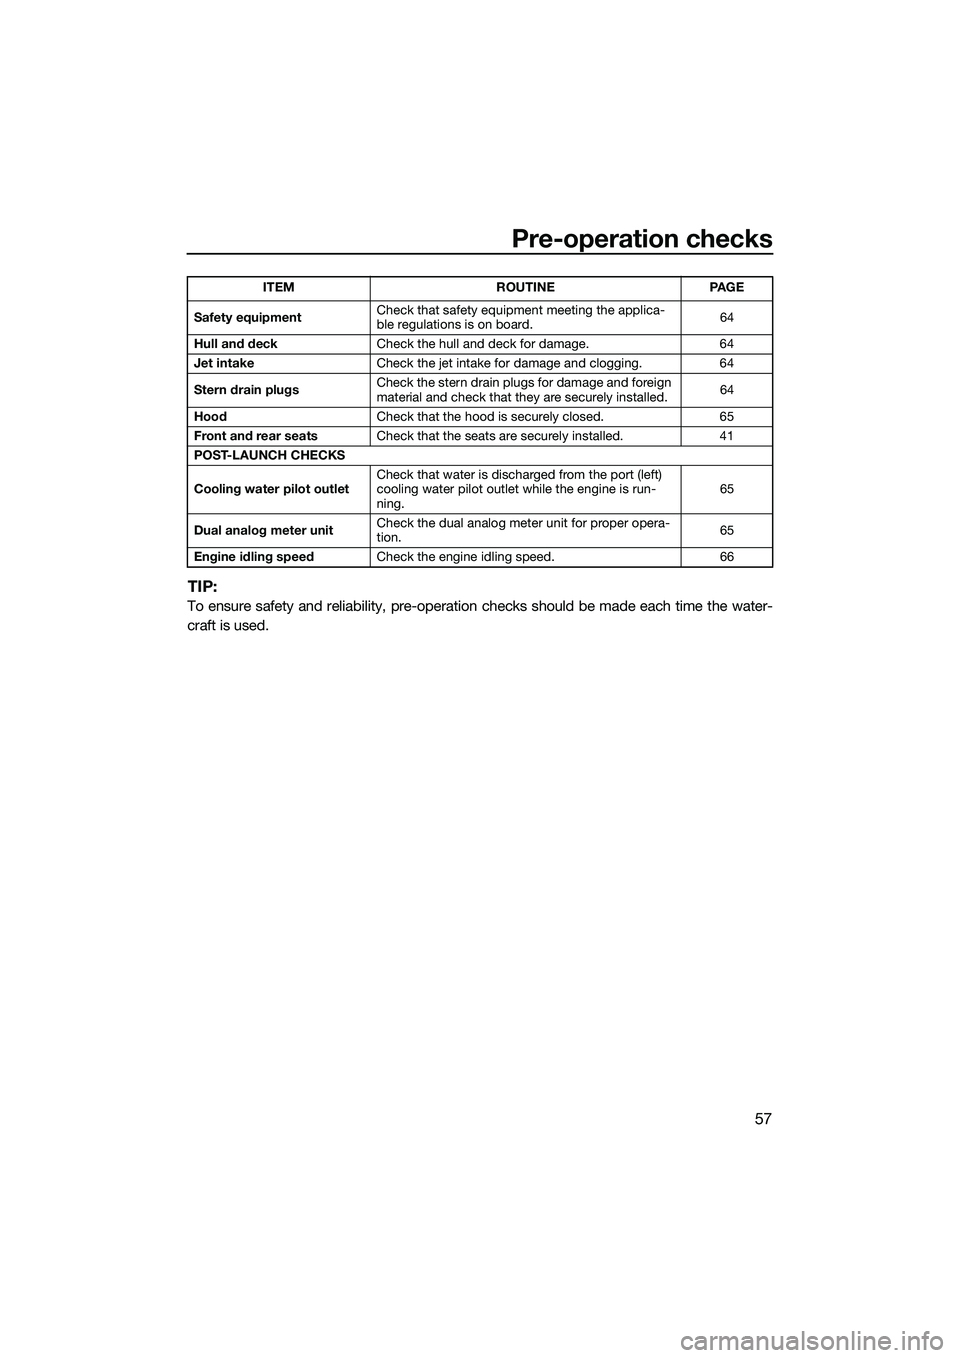 YAMAHA FZS SVHO 2014  Owners Manual Pre-operation checks
57
TIP:
To ensure safety and reliability, pre-operation checks should be made each time the water-
craft is used.
Safety equipment Check that safety equipment meeting the applica-